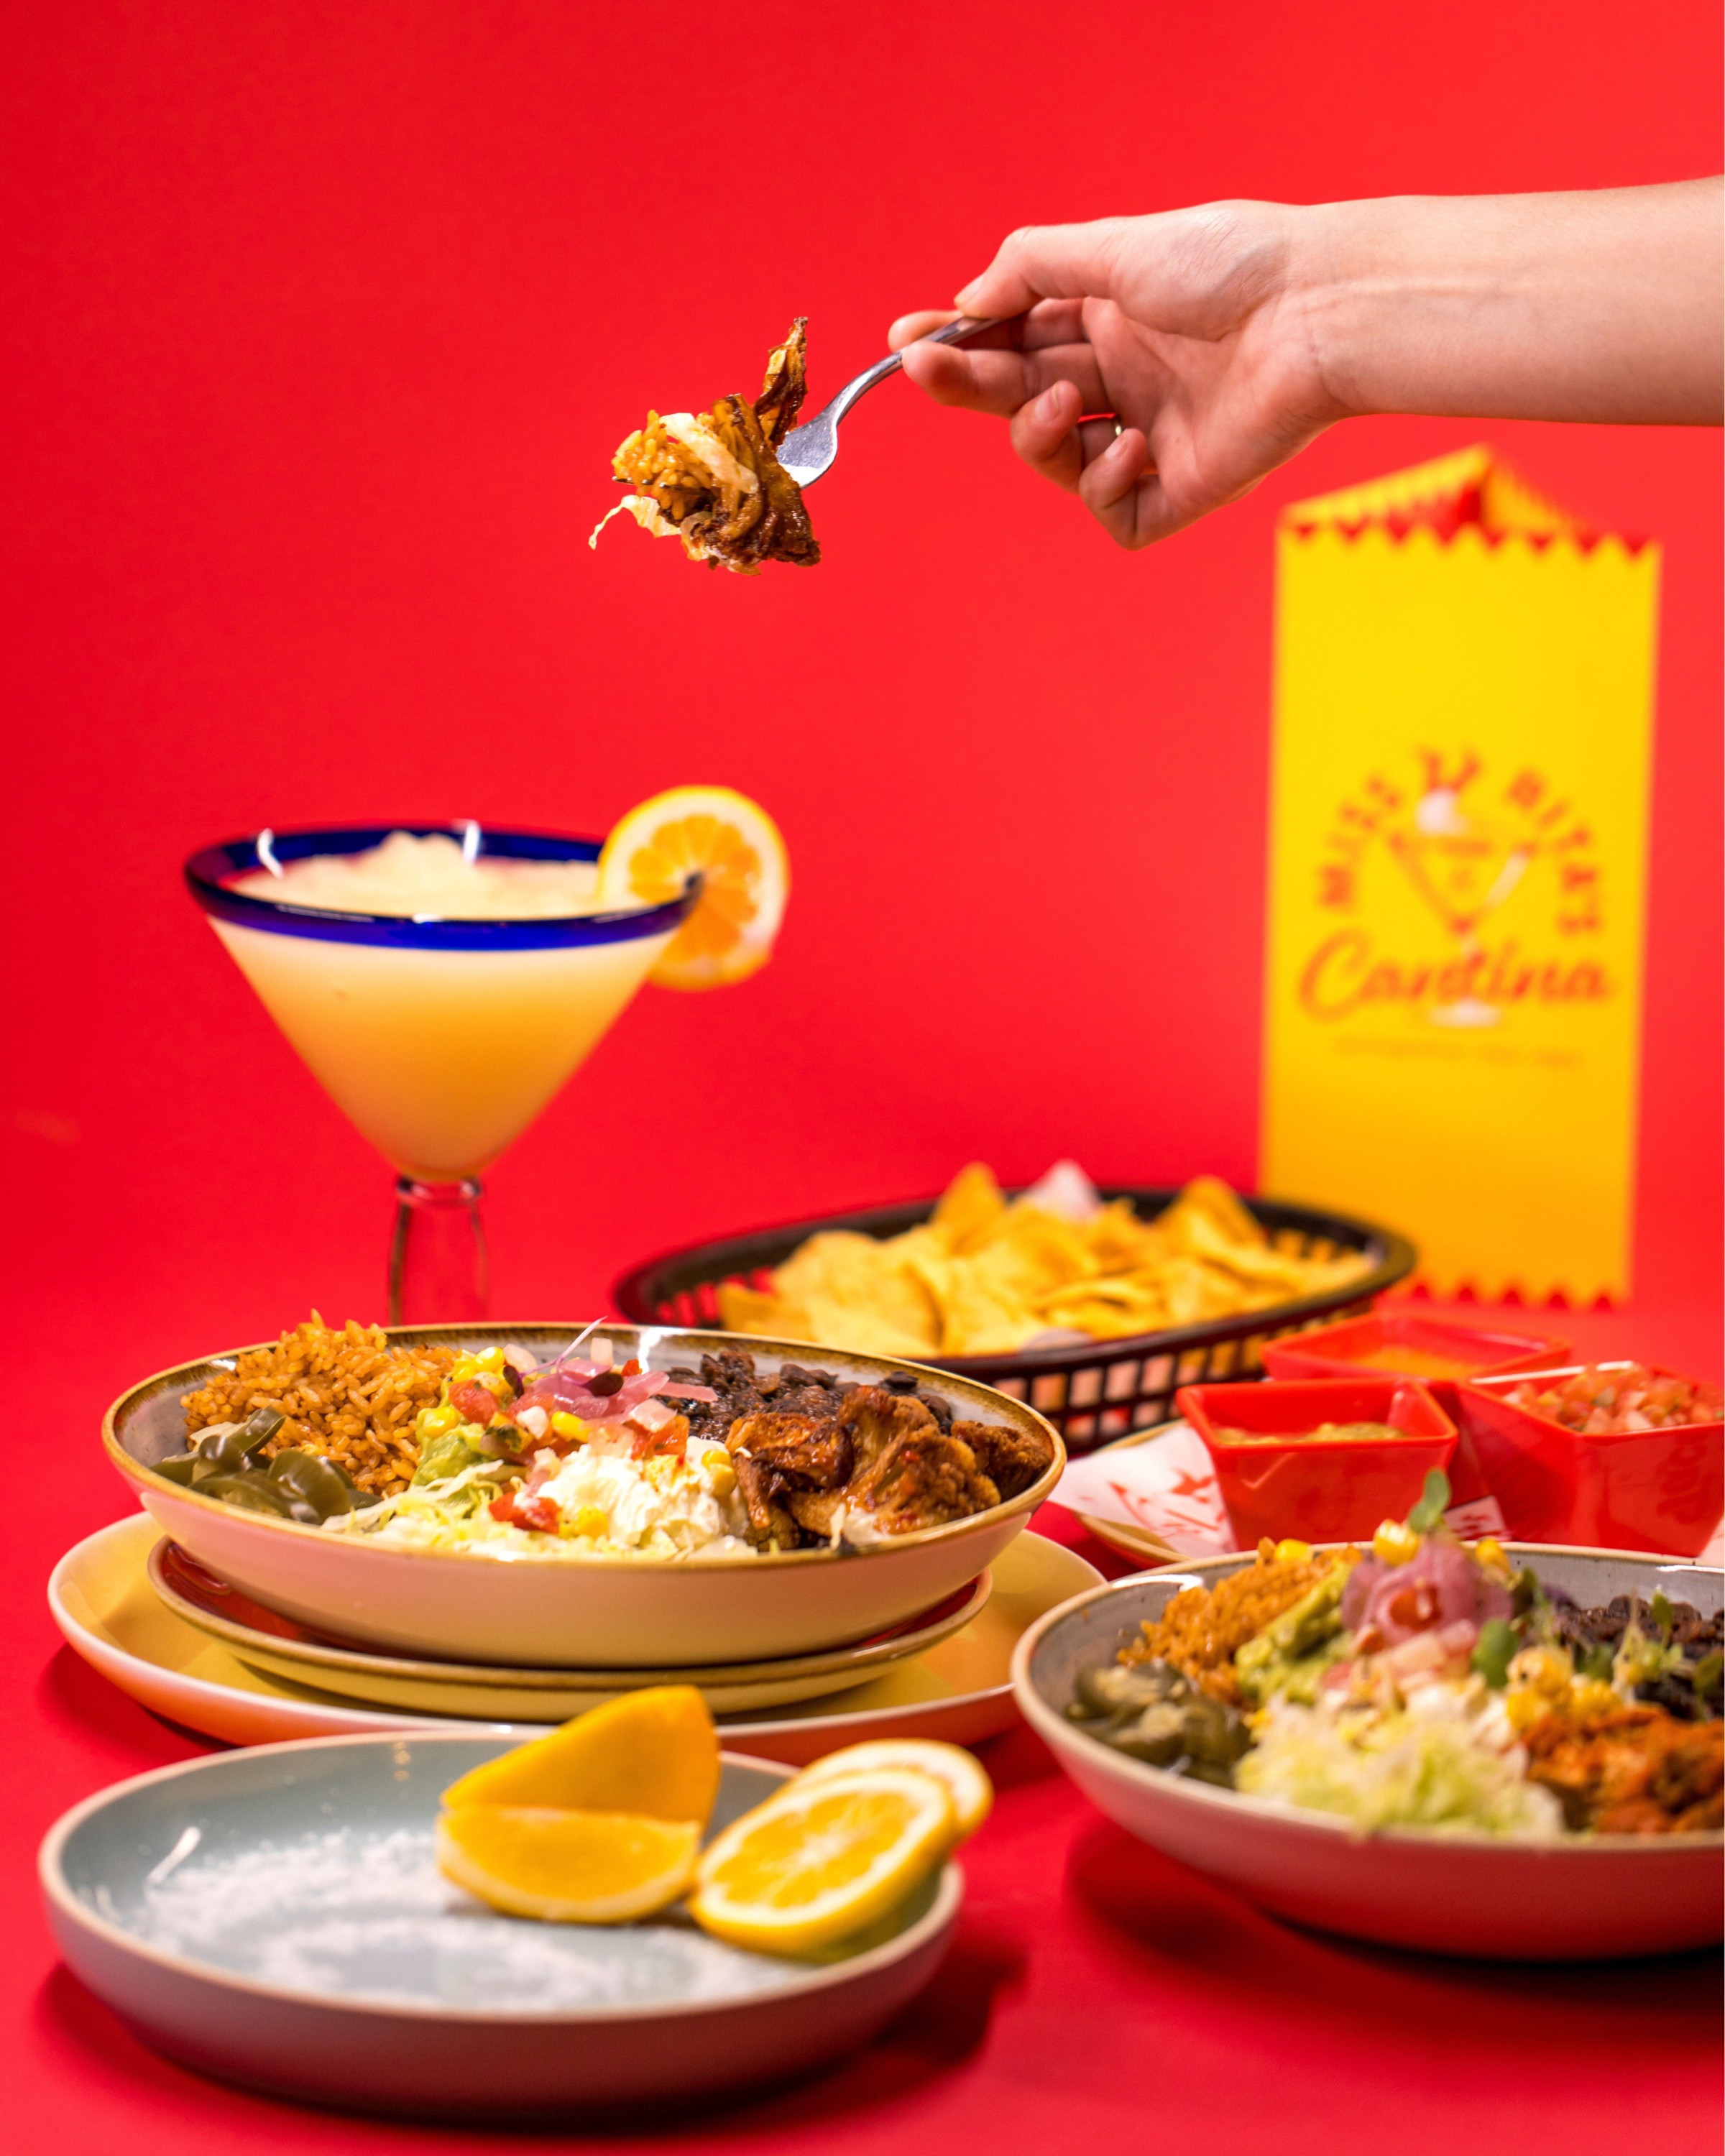 New Tex-Mex eatery Miss Rita's Cantina has opened in Queenstown